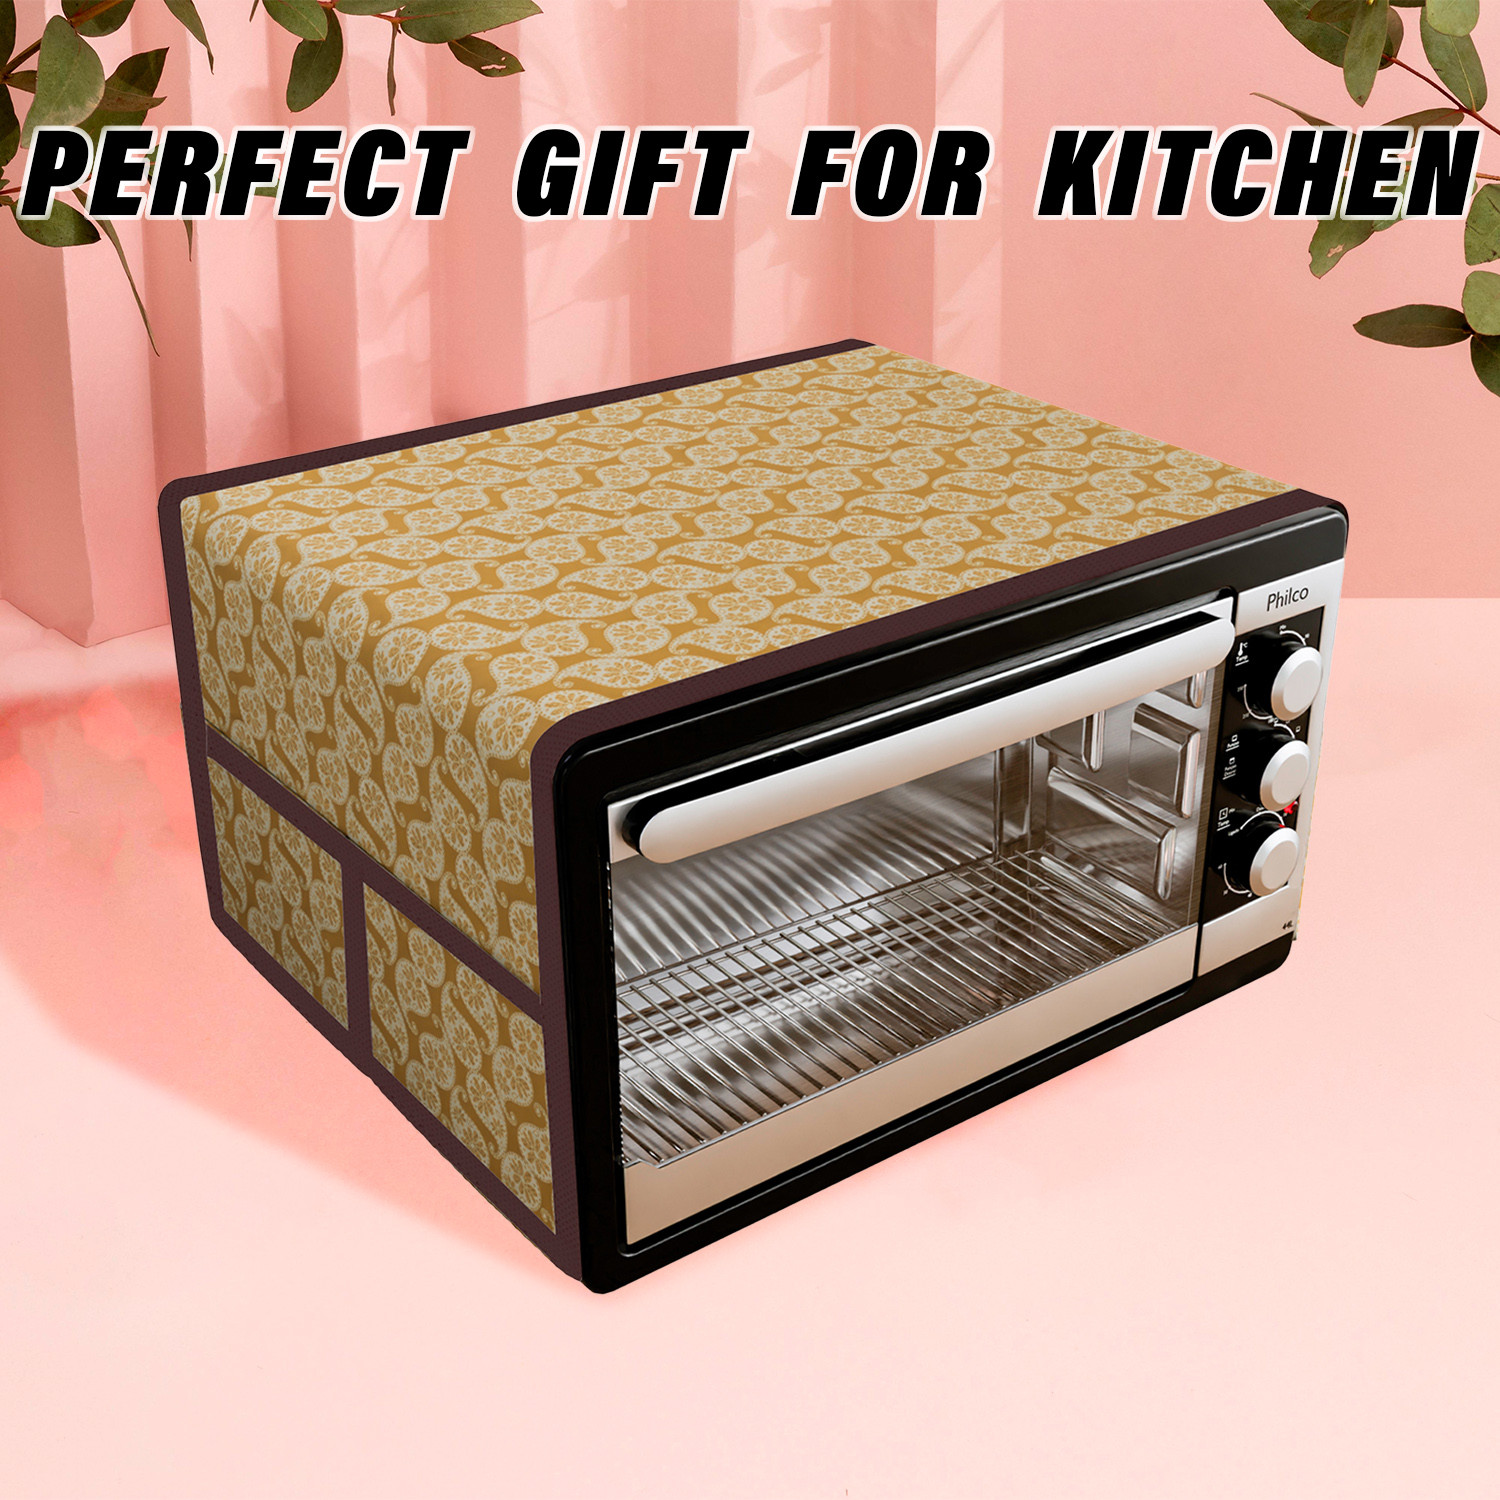 Kuber Industries Oven Top Cover | Microwave Oven Top Cover | Microwave Cover with 4 Utility Pockets | Oven Cover for Kitchen Décor | Carry Design Oven Top Cover | 30 LTR | Golden